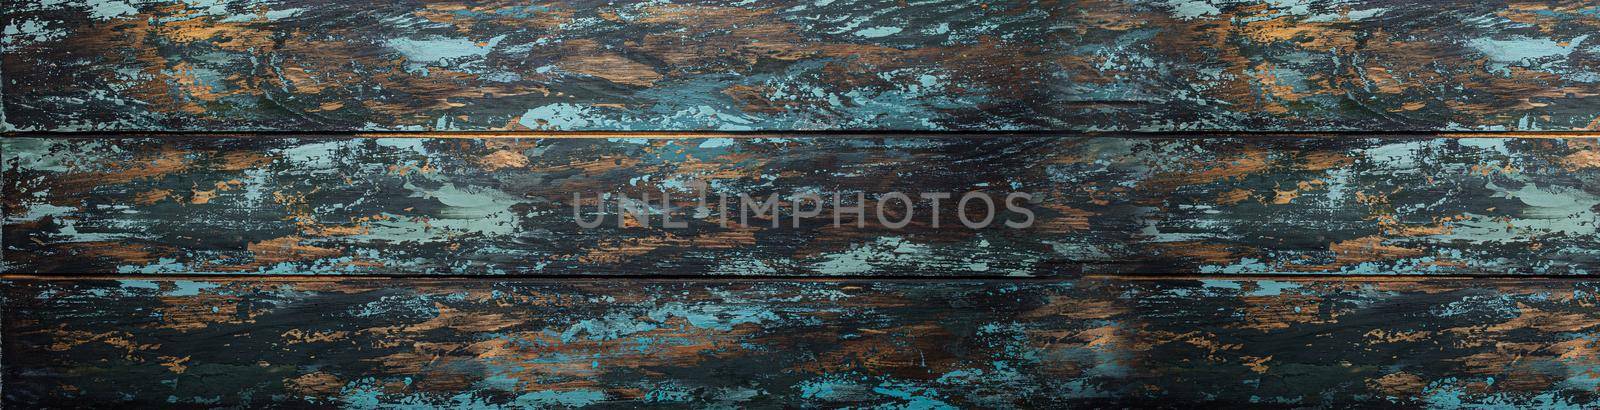 Cracked and peeled blue painted wooden panels rustic blank background or backdrop with space for text, old wooden panels texture template wall surface for design copy space